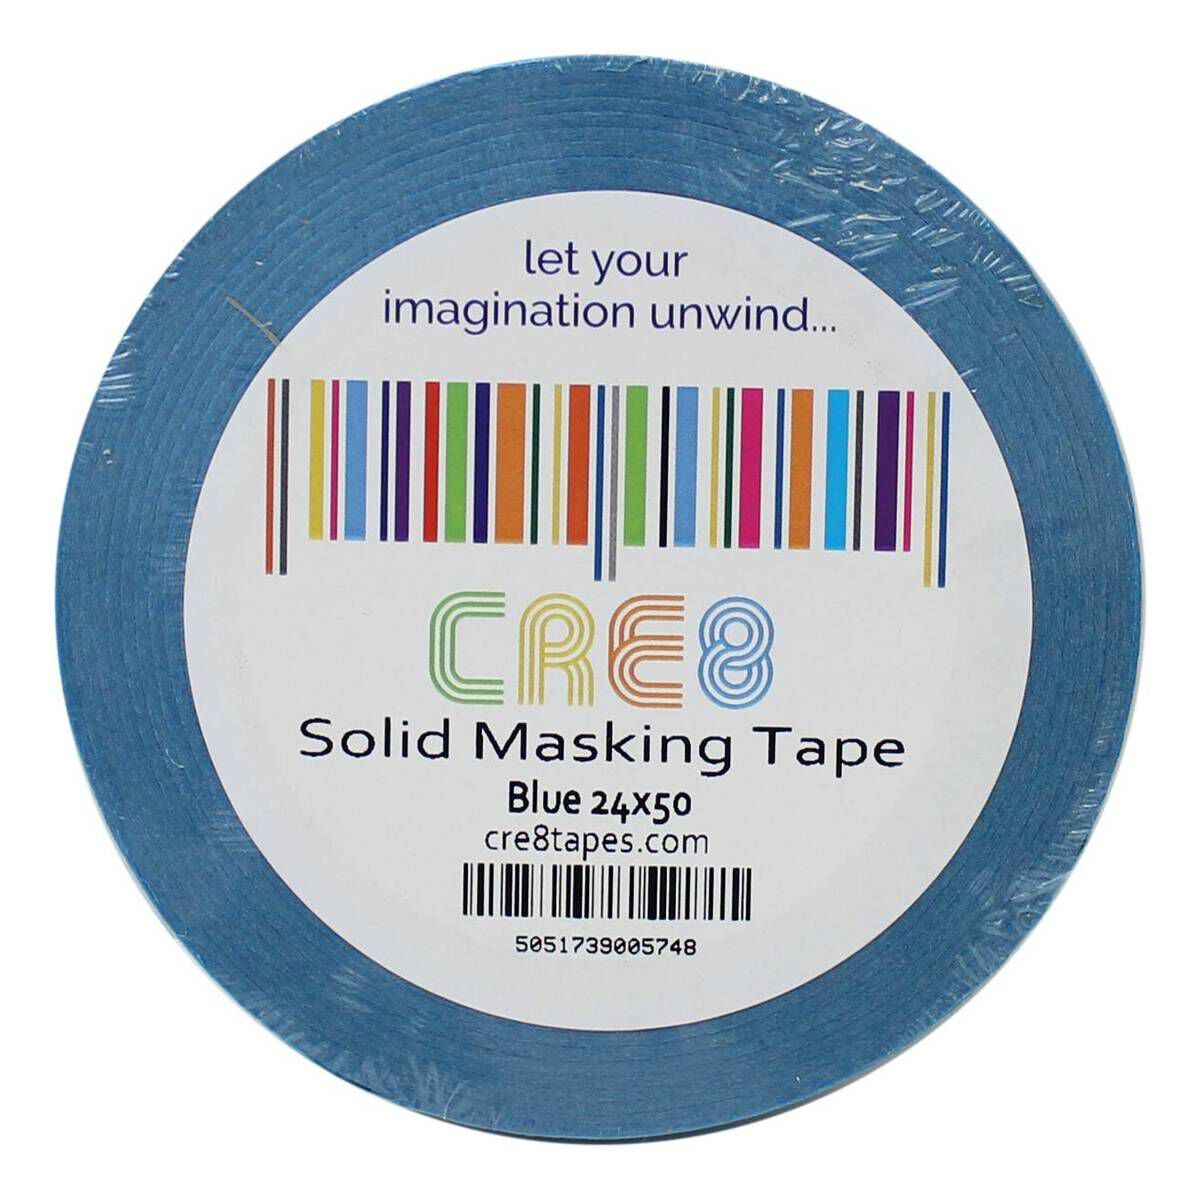 18mm X 18m Masking Tape Single Pack VALLEJO HOBBY CRAFT MODELING ACCESSORY 